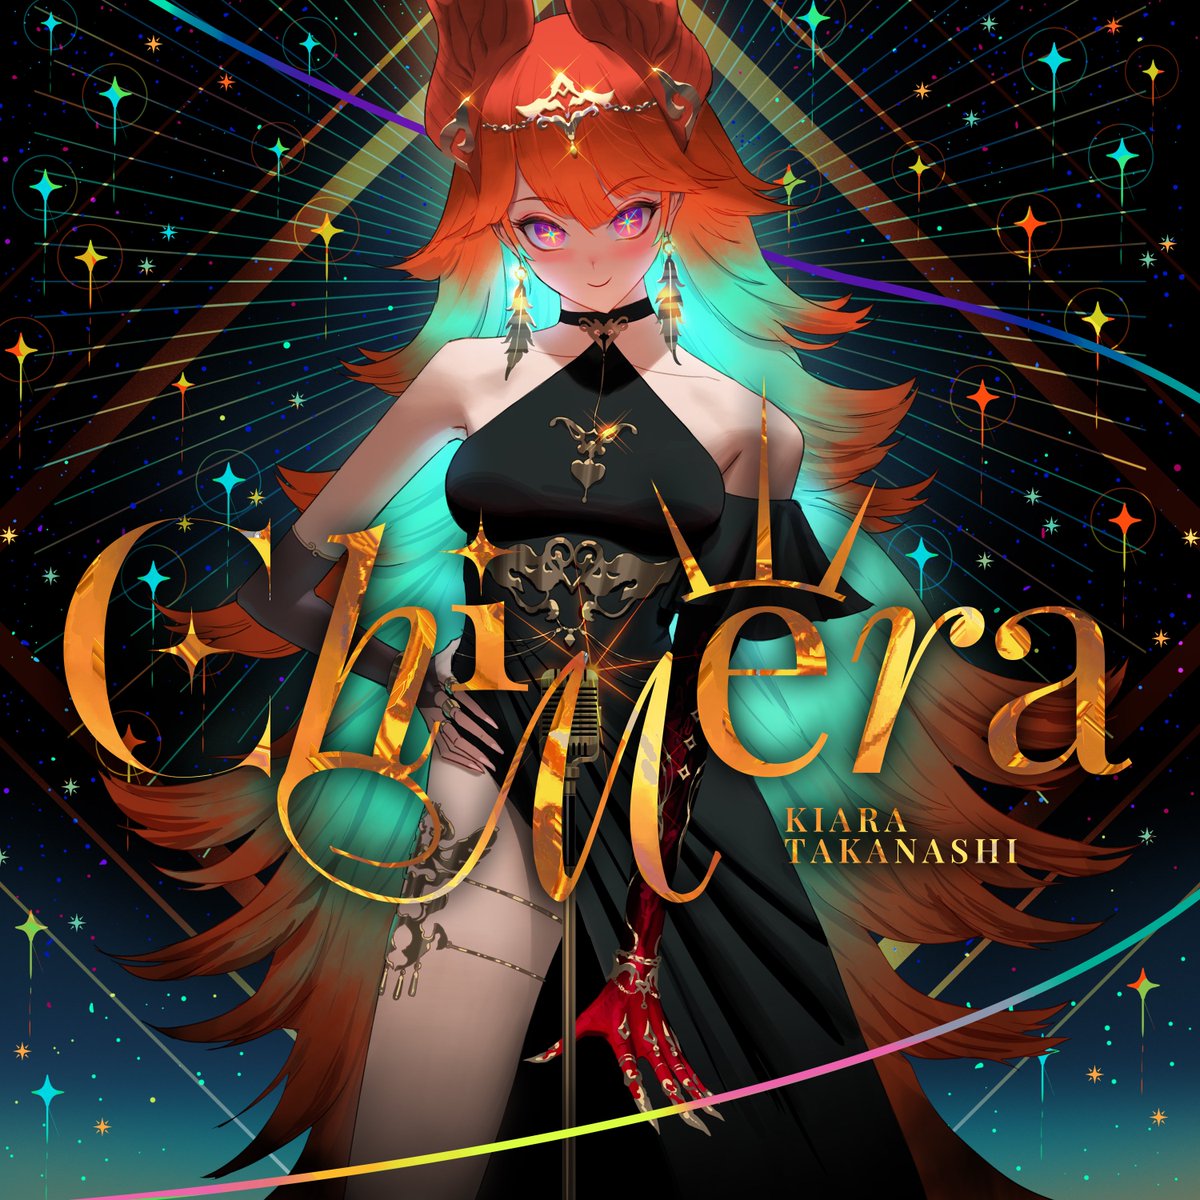 【CHIMERA STREAMING START】 My new single CHIMERA will be available to stream on Spotify, Amazon, Apple & Youtube Music starting from midnight in your local timezone today, 5th April! キアラの新曲 CHIMERA が本日の零時から配信サービスにリリースされる!!! cover.lnk.to/CHIMERA